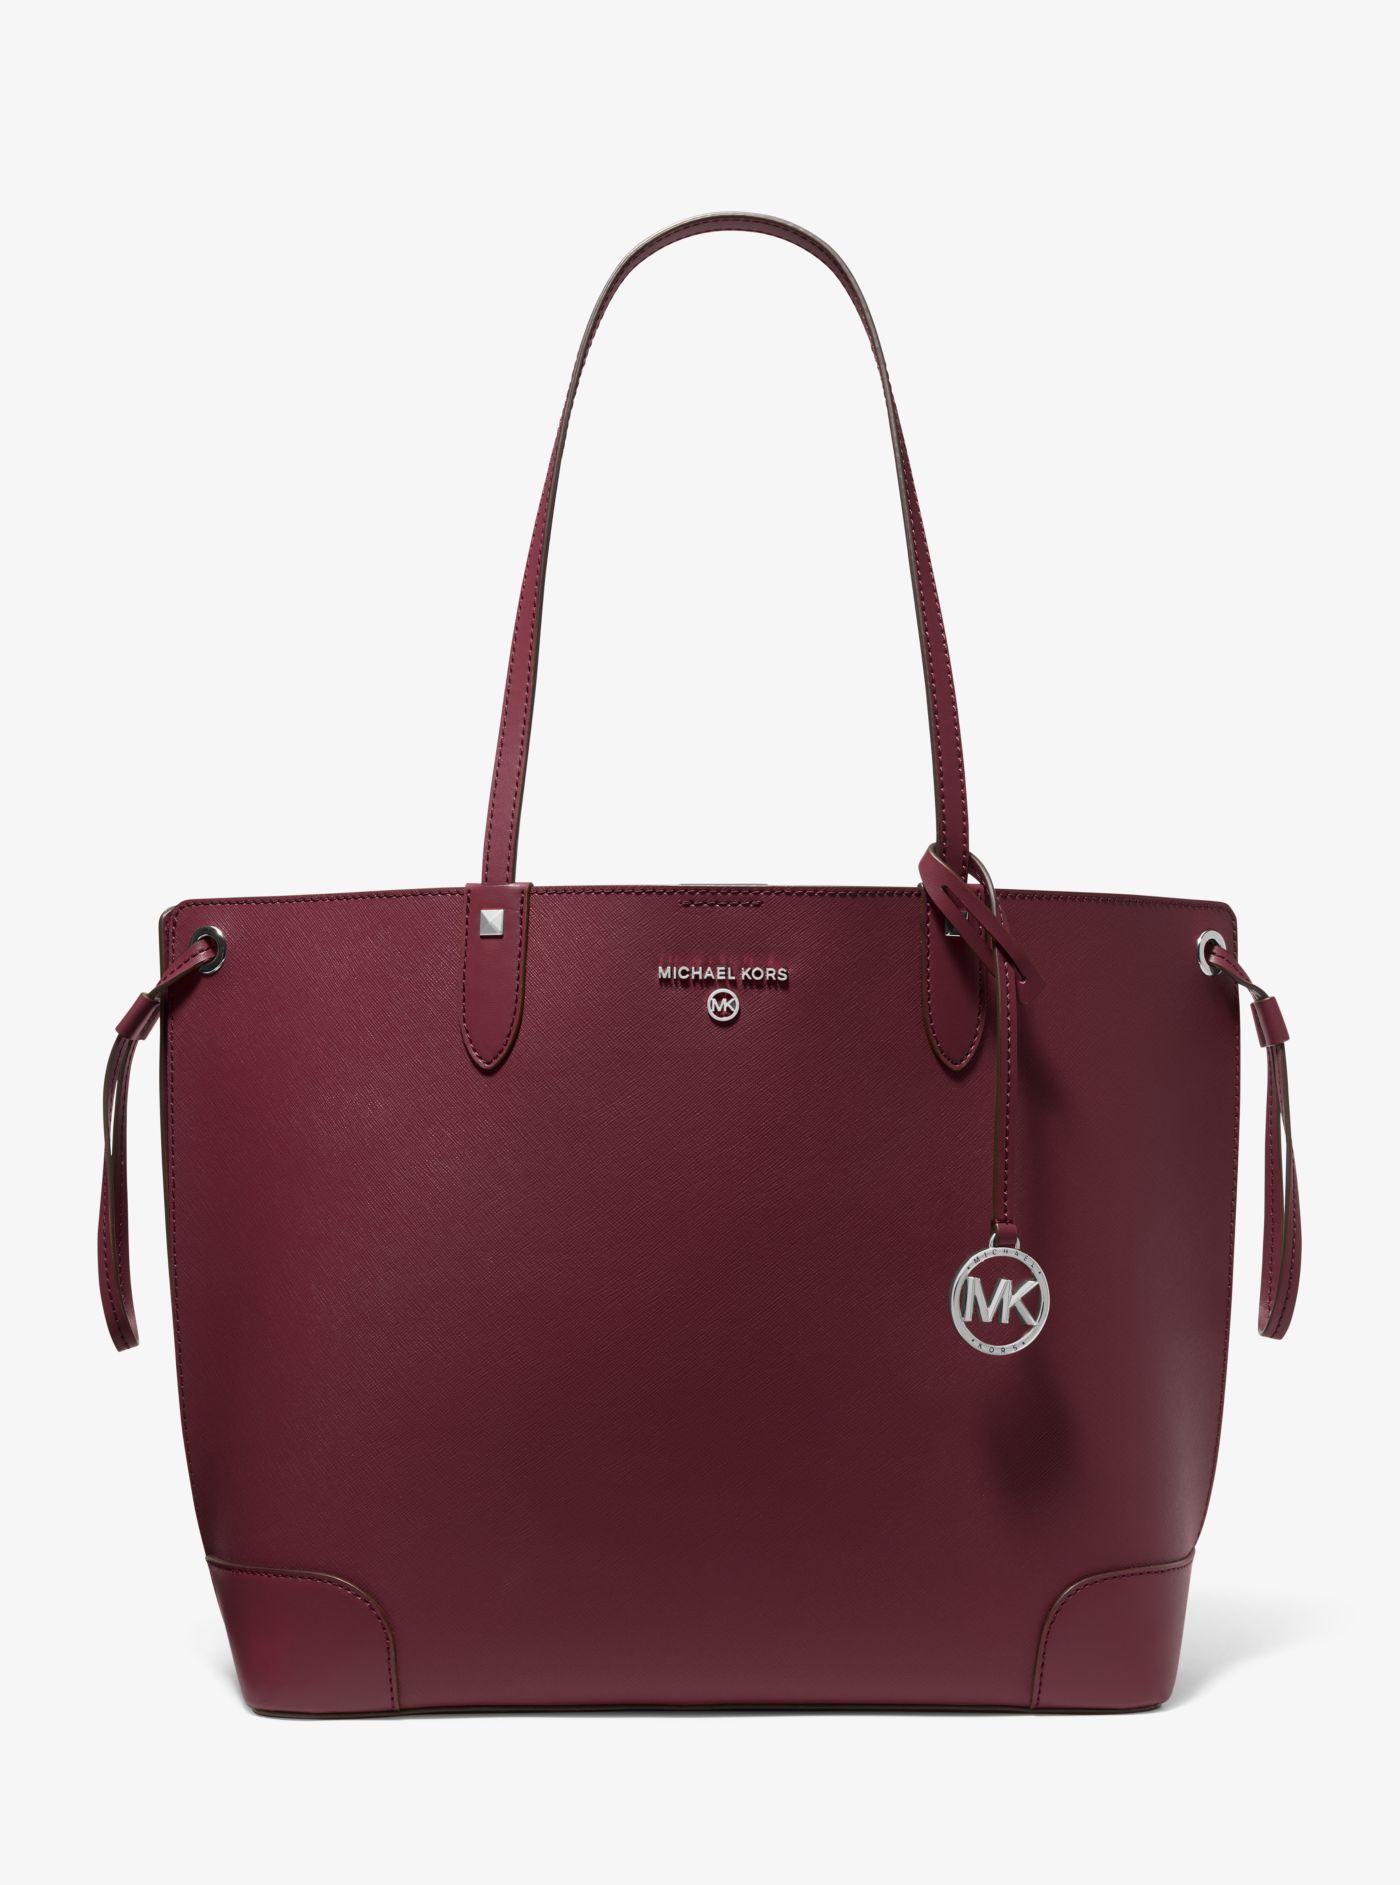 Michael Kors Edith Large Saffiano Leather Tote Bag | Lyst